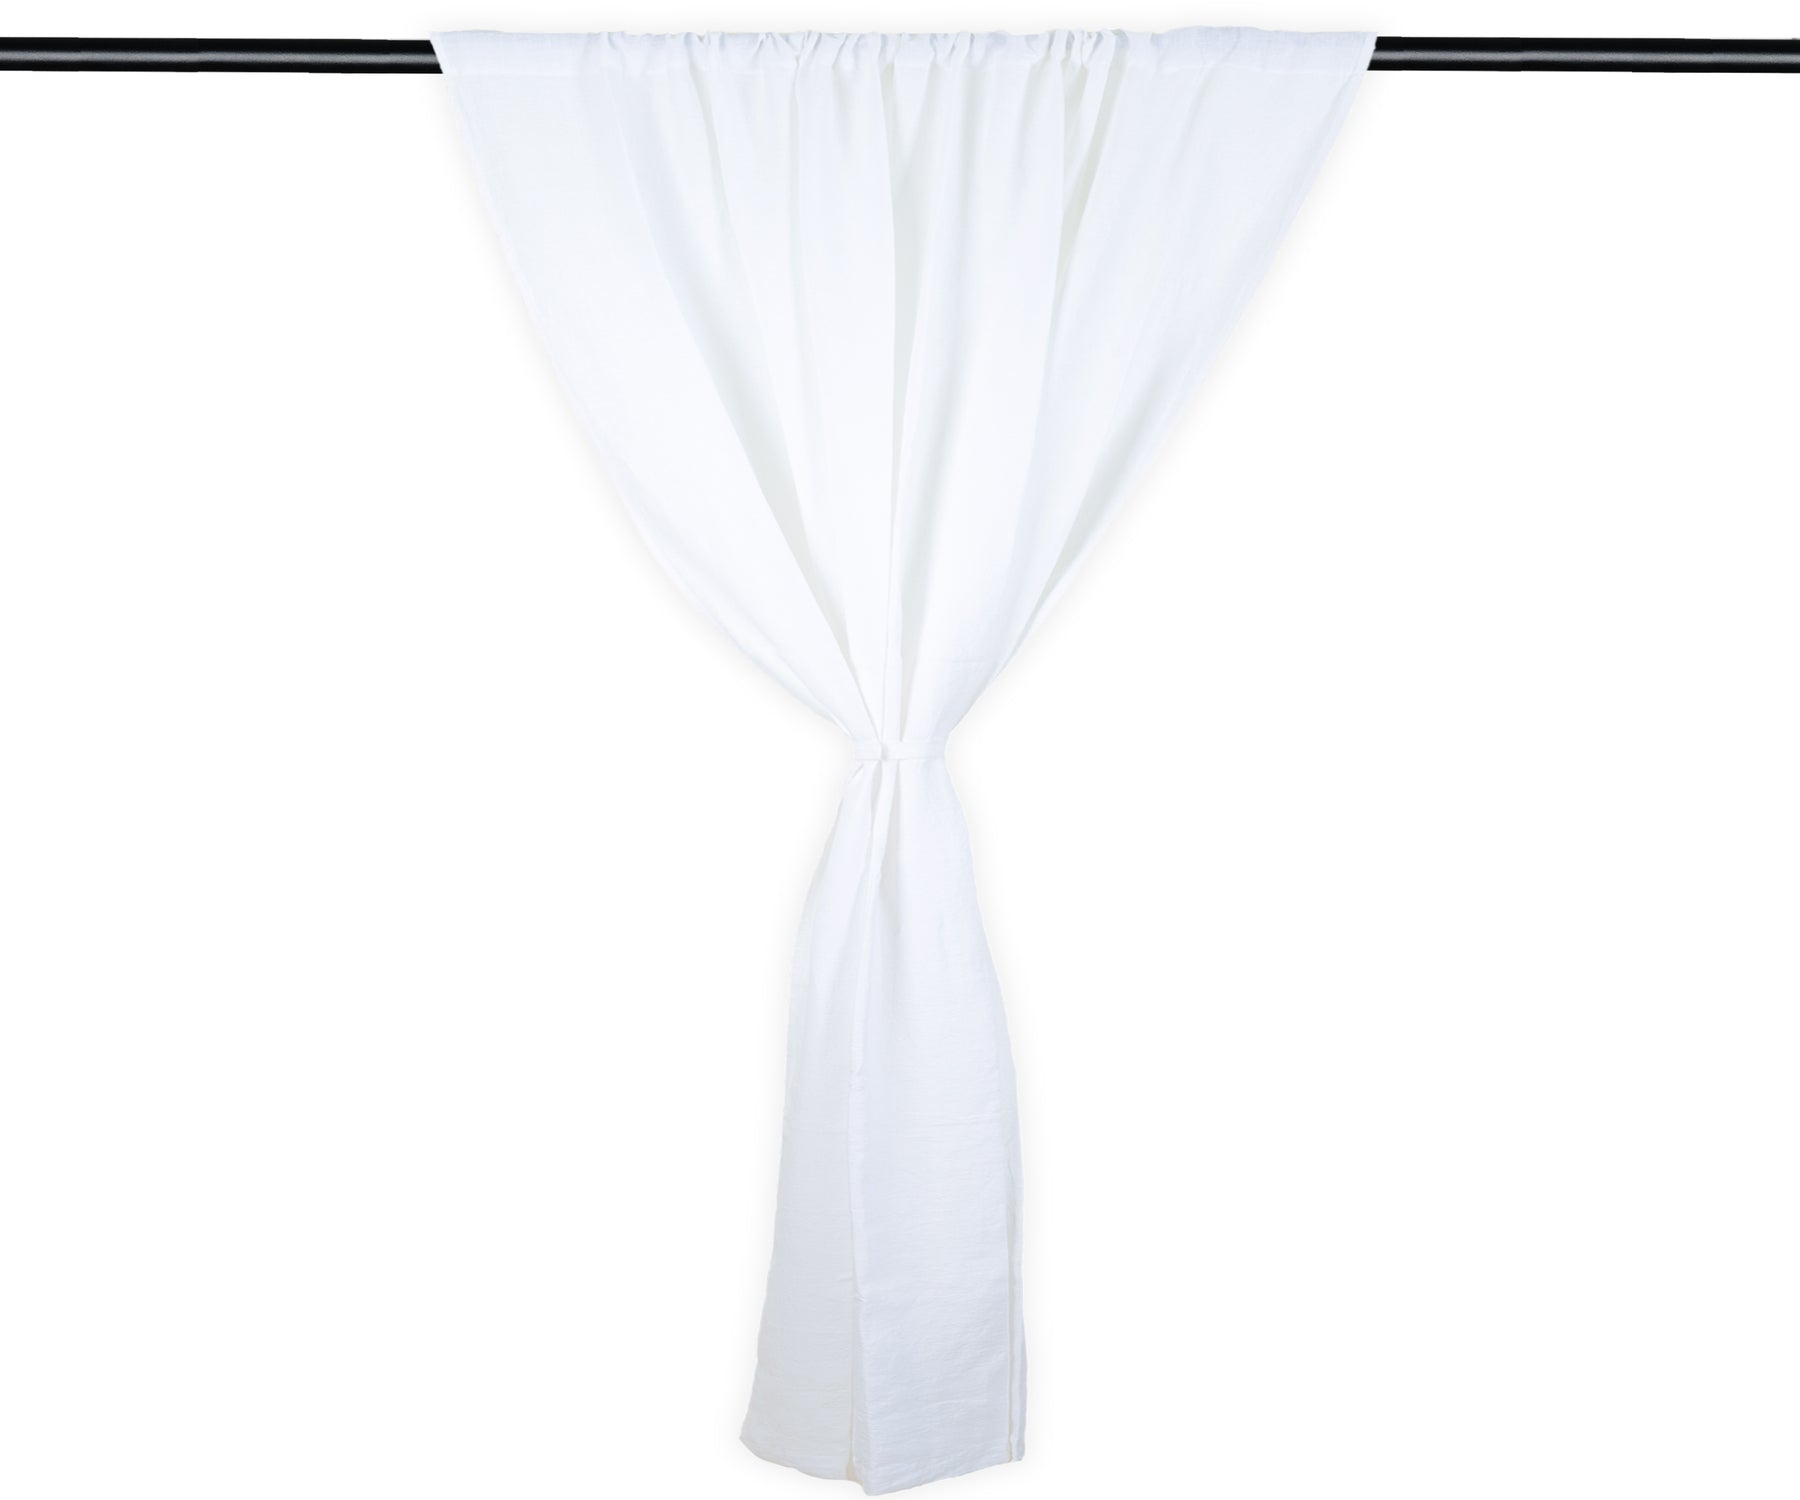 Immaculate white shower curtain for a bright bathing zone